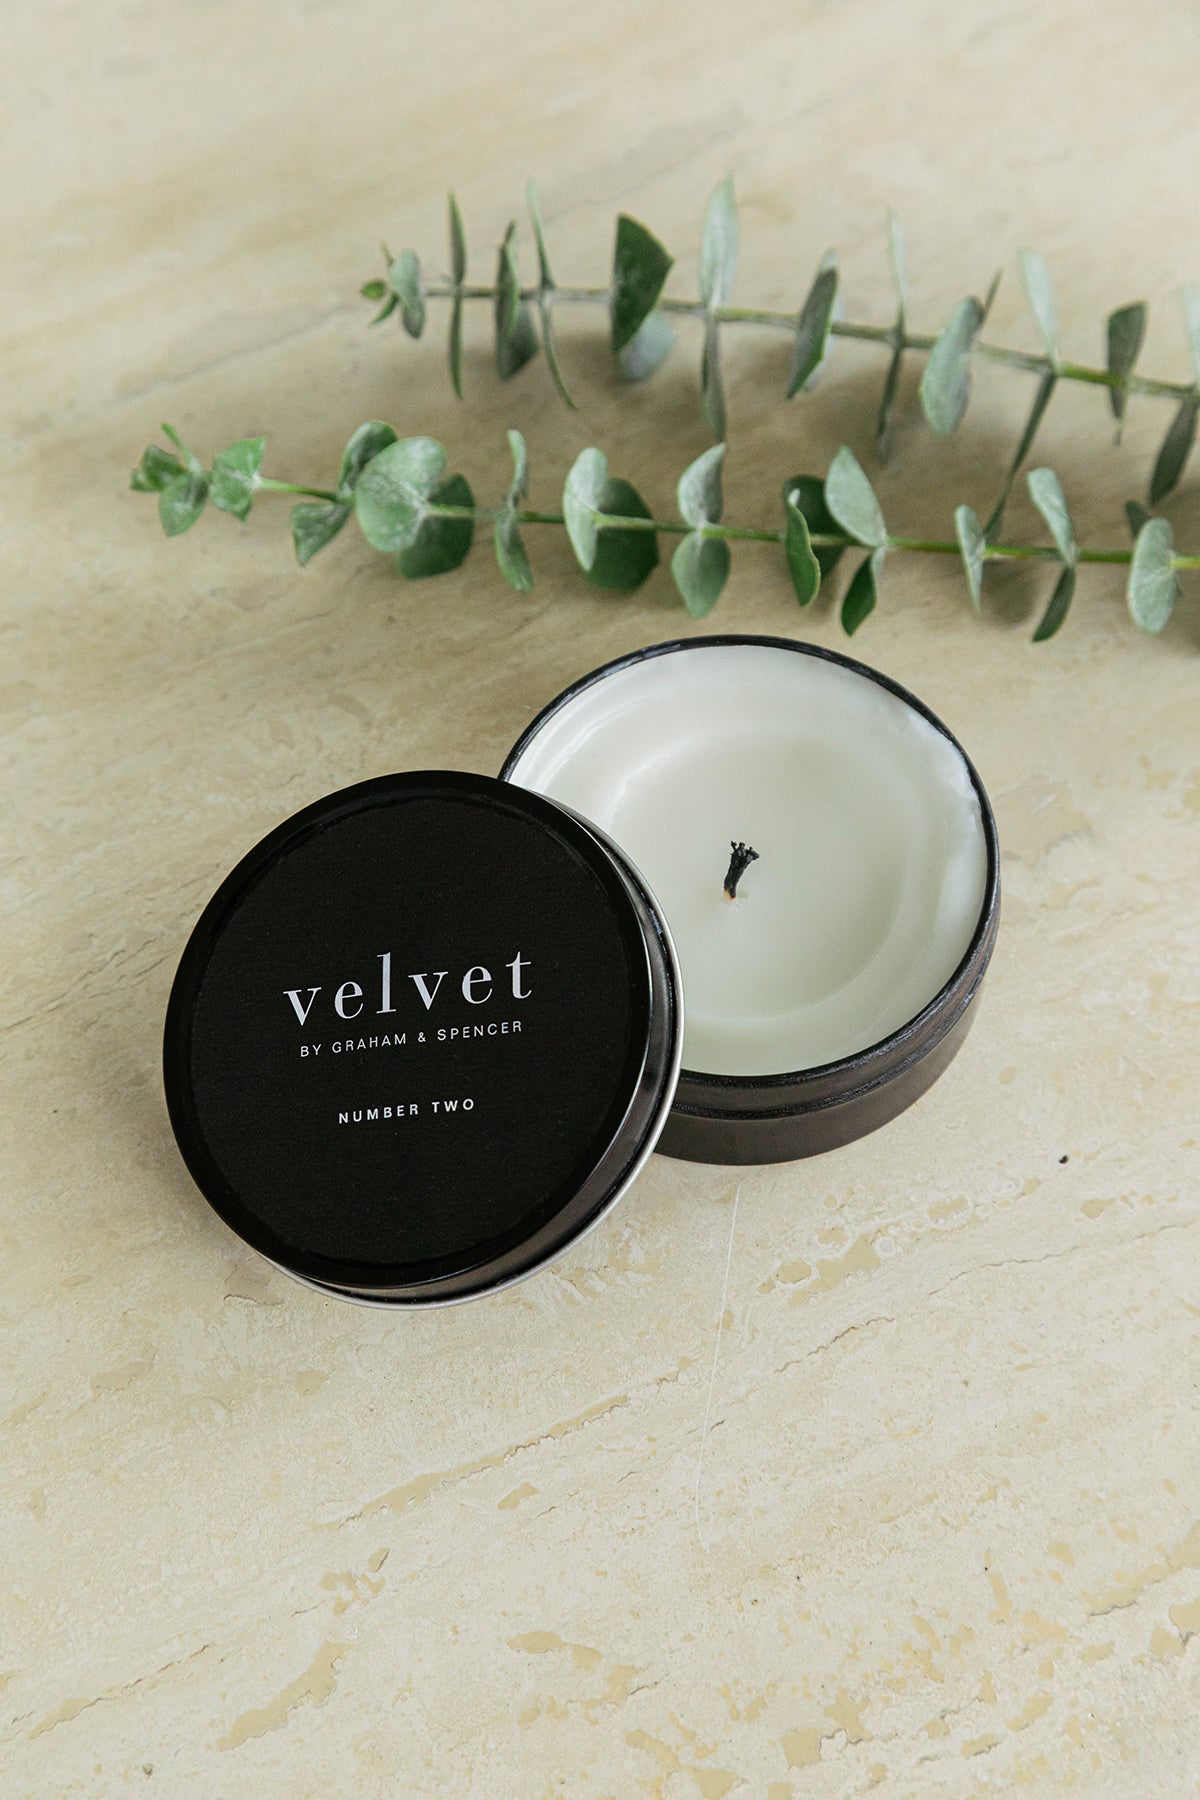 Velvet Travel Candle Number Two-24706153644225